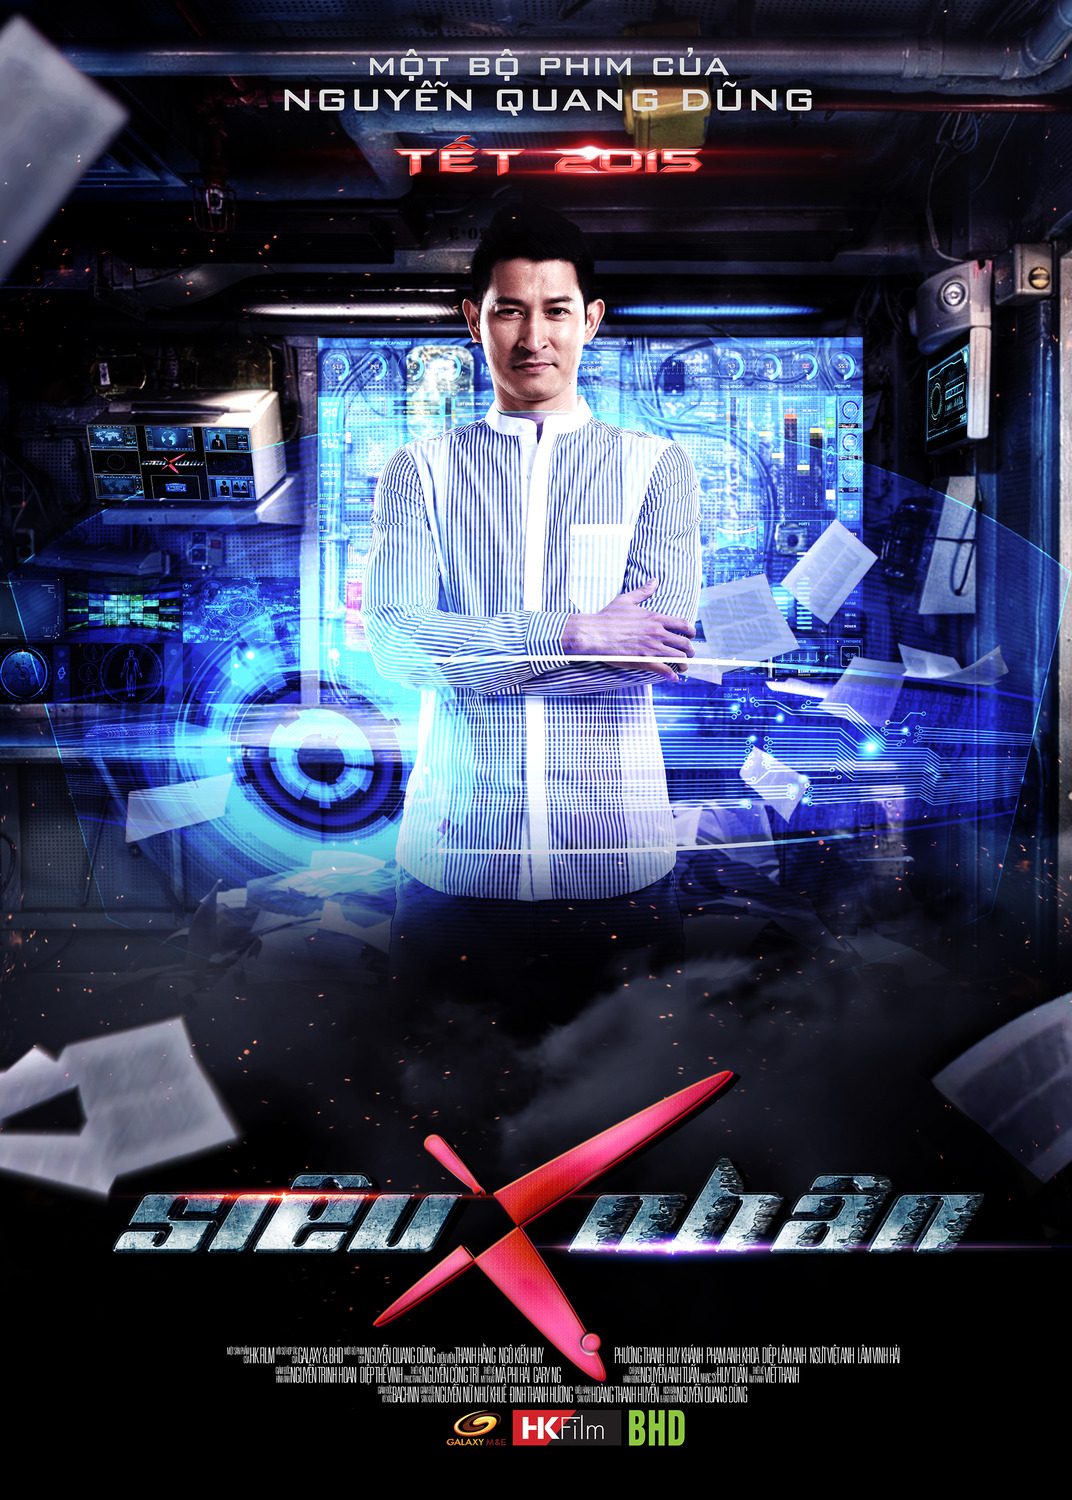 Extra Large Movie Poster Image for Sieu Nhan X: Super X (#4 of 8)